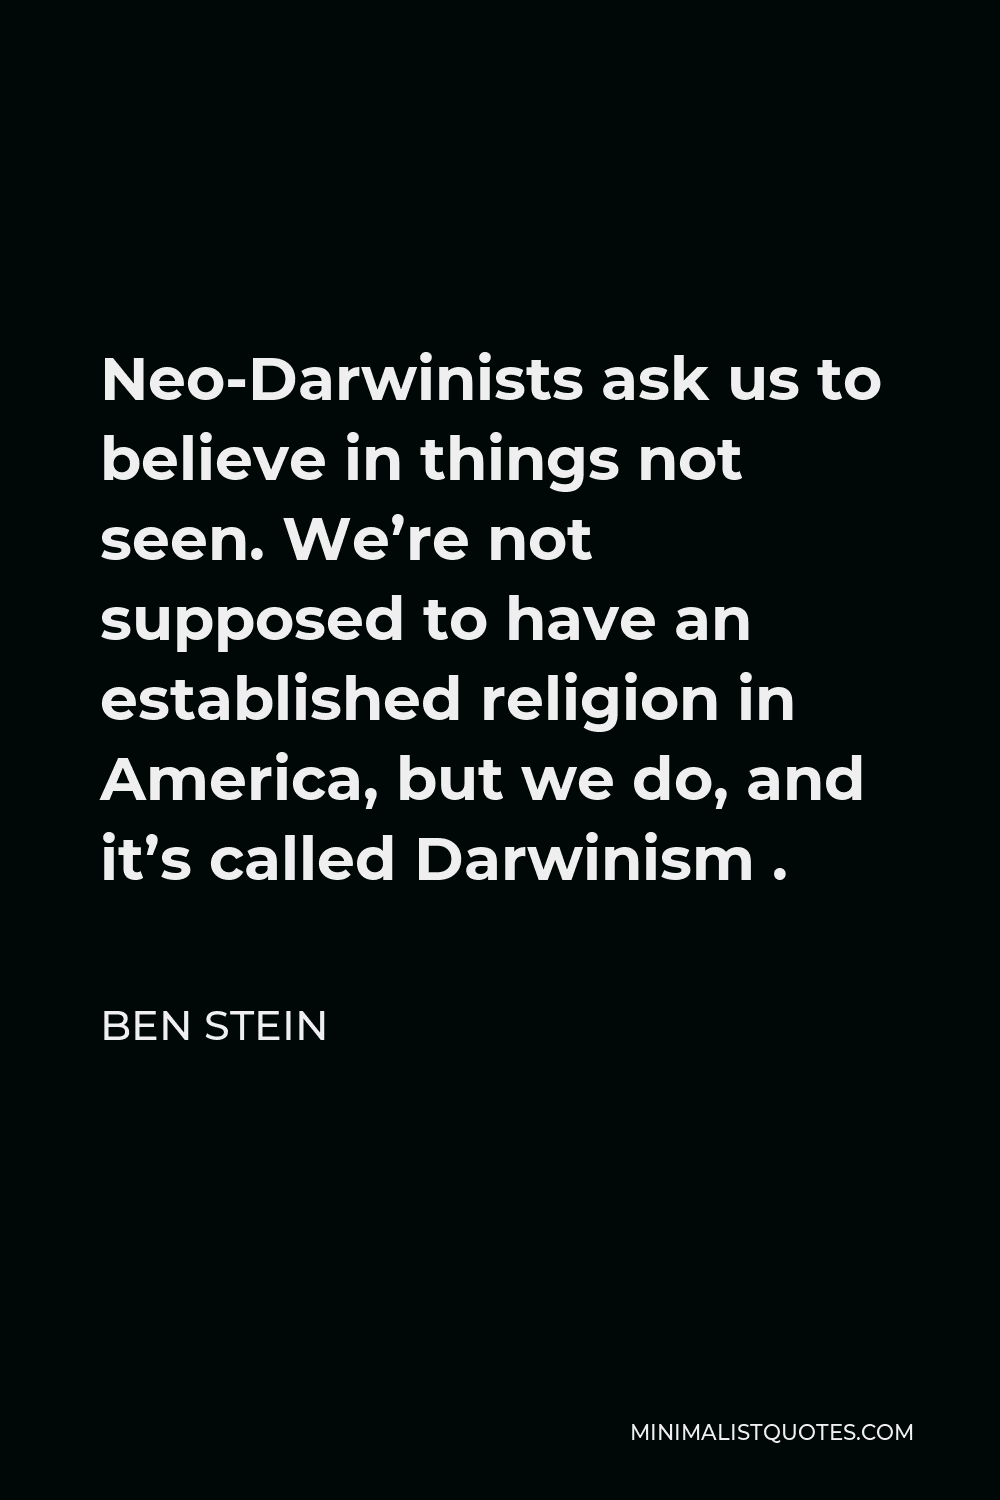 Ben Stein Quote - Neo-Darwinists ask us to believe in things not seen. We’re not supposed to have an established religion in America, but we do, and it’s called Darwinism .